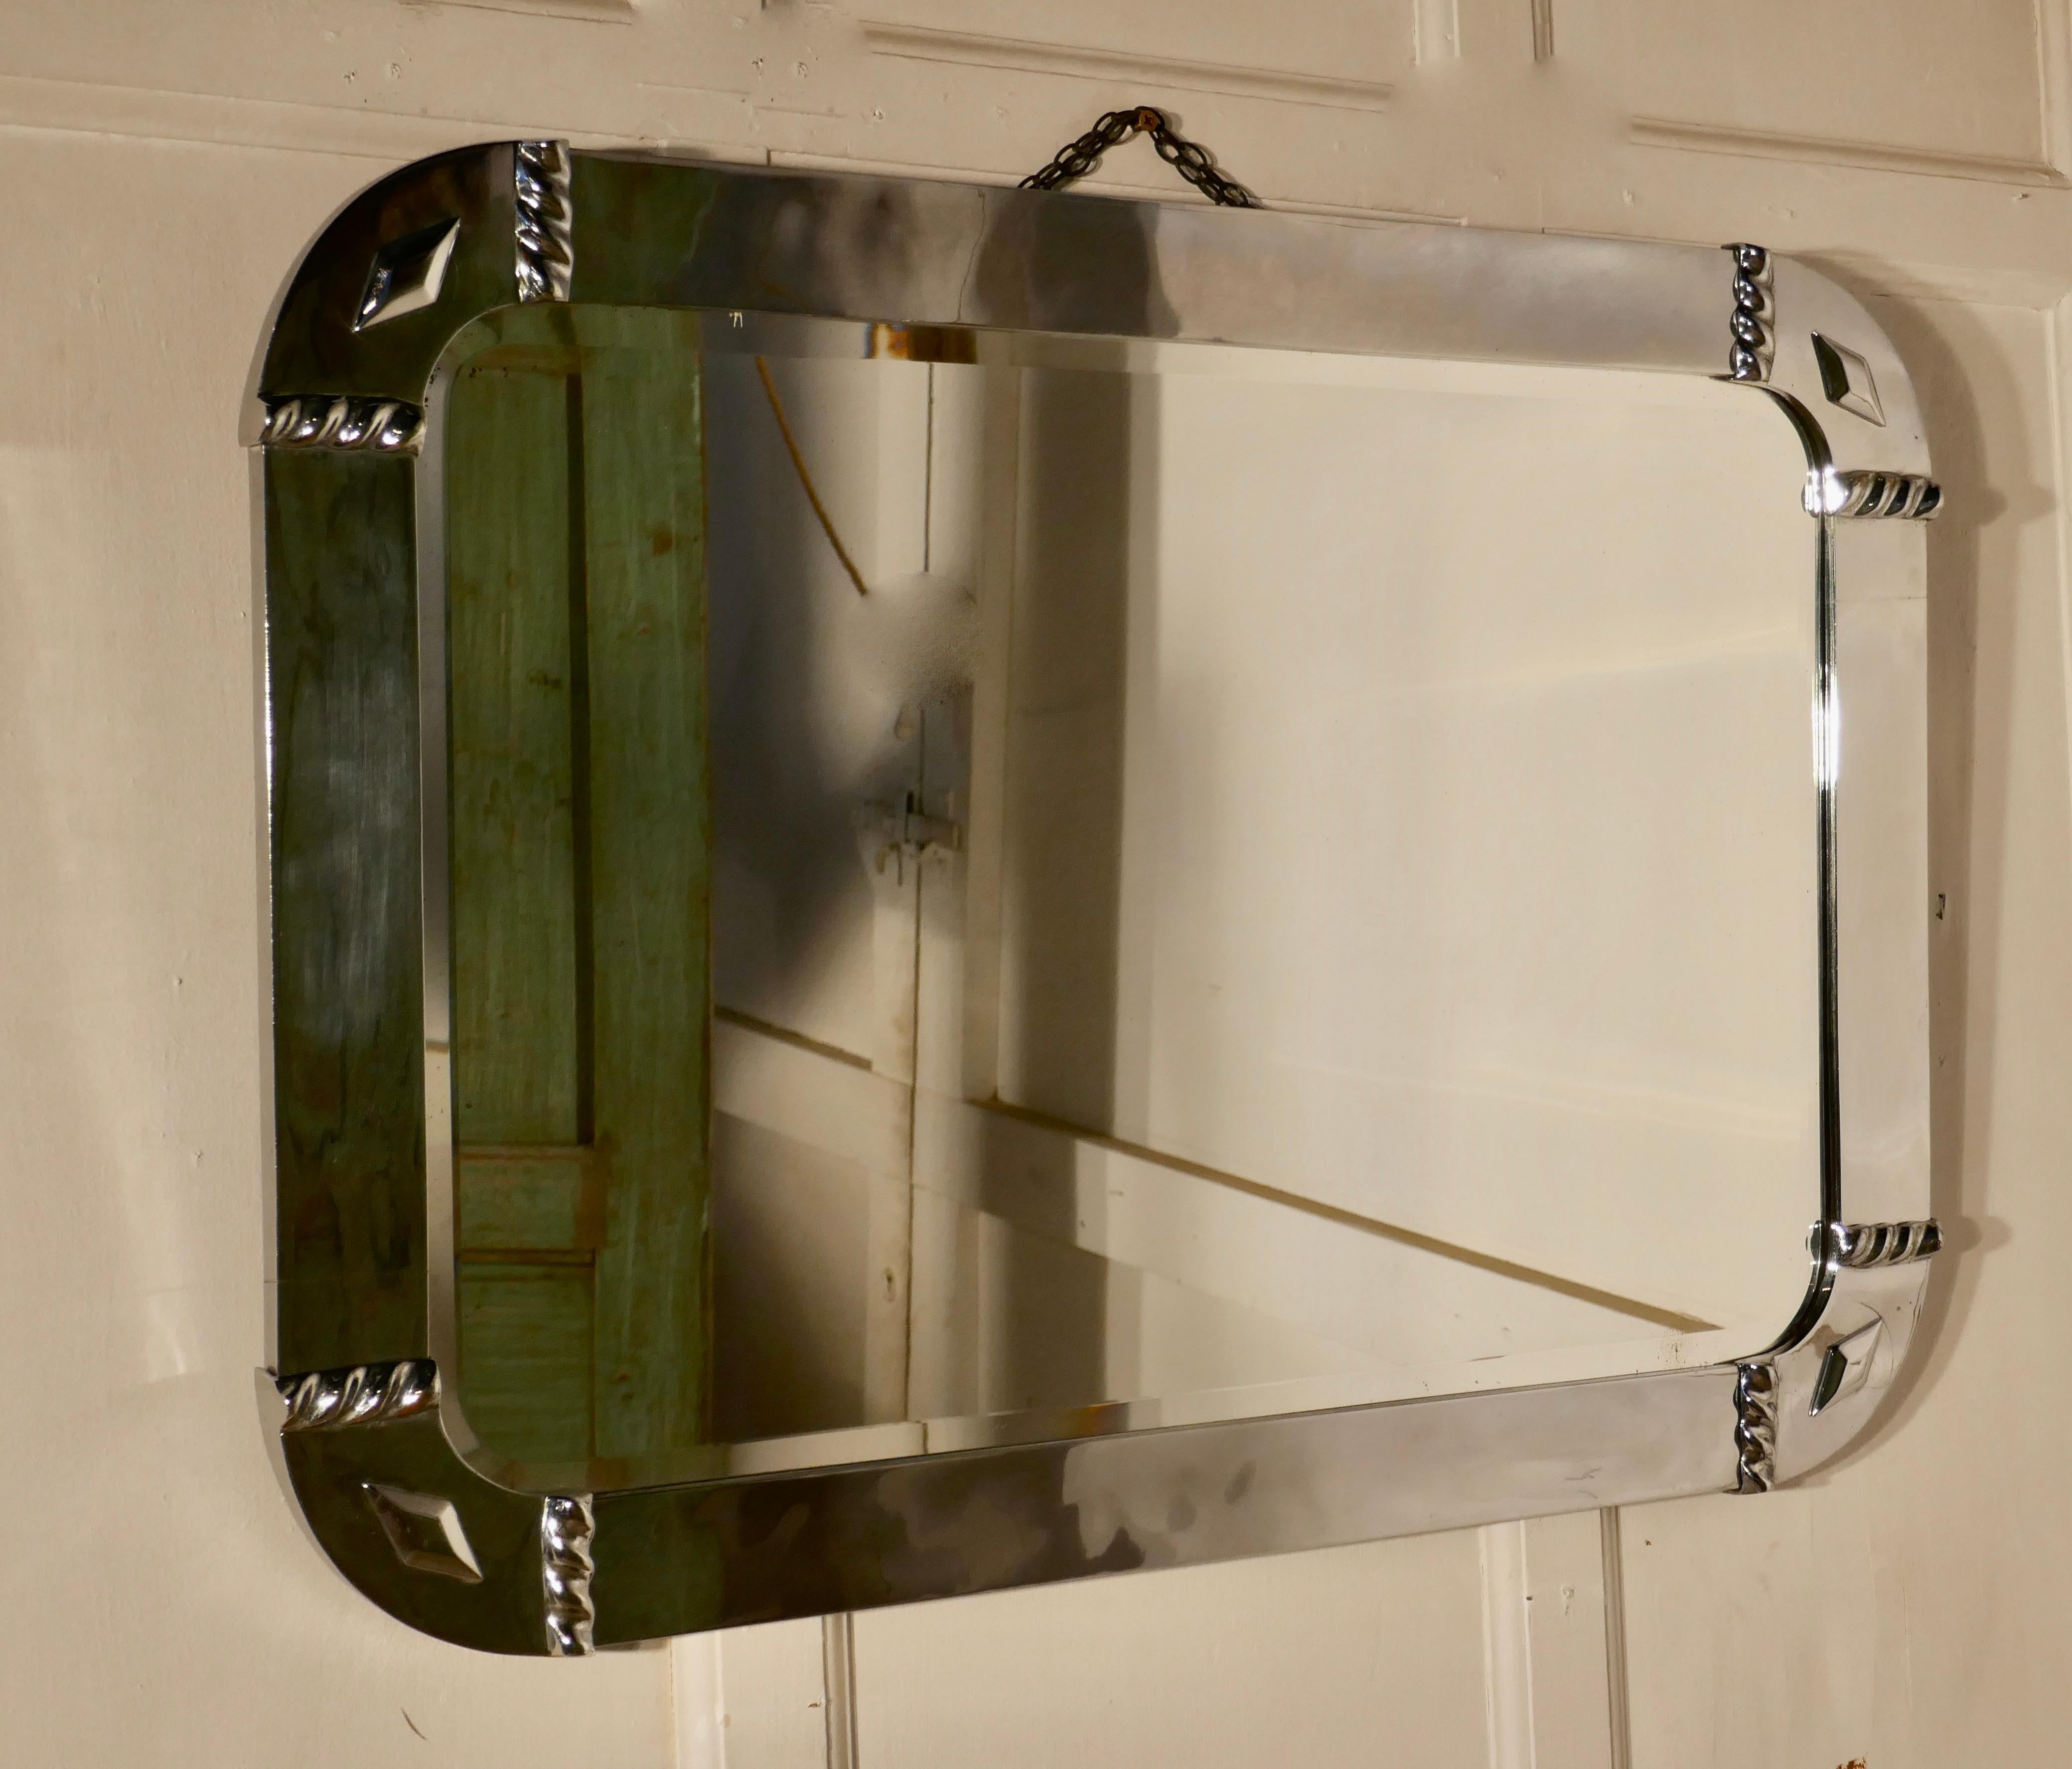 Large French Art Deco chrome wall mirror

This is a very stylish piece, the mirror has a 3” wide chrome frame with large curving corners and a diamond decoration to each 

The mirror is in good condition with little signs of its age
The mirror